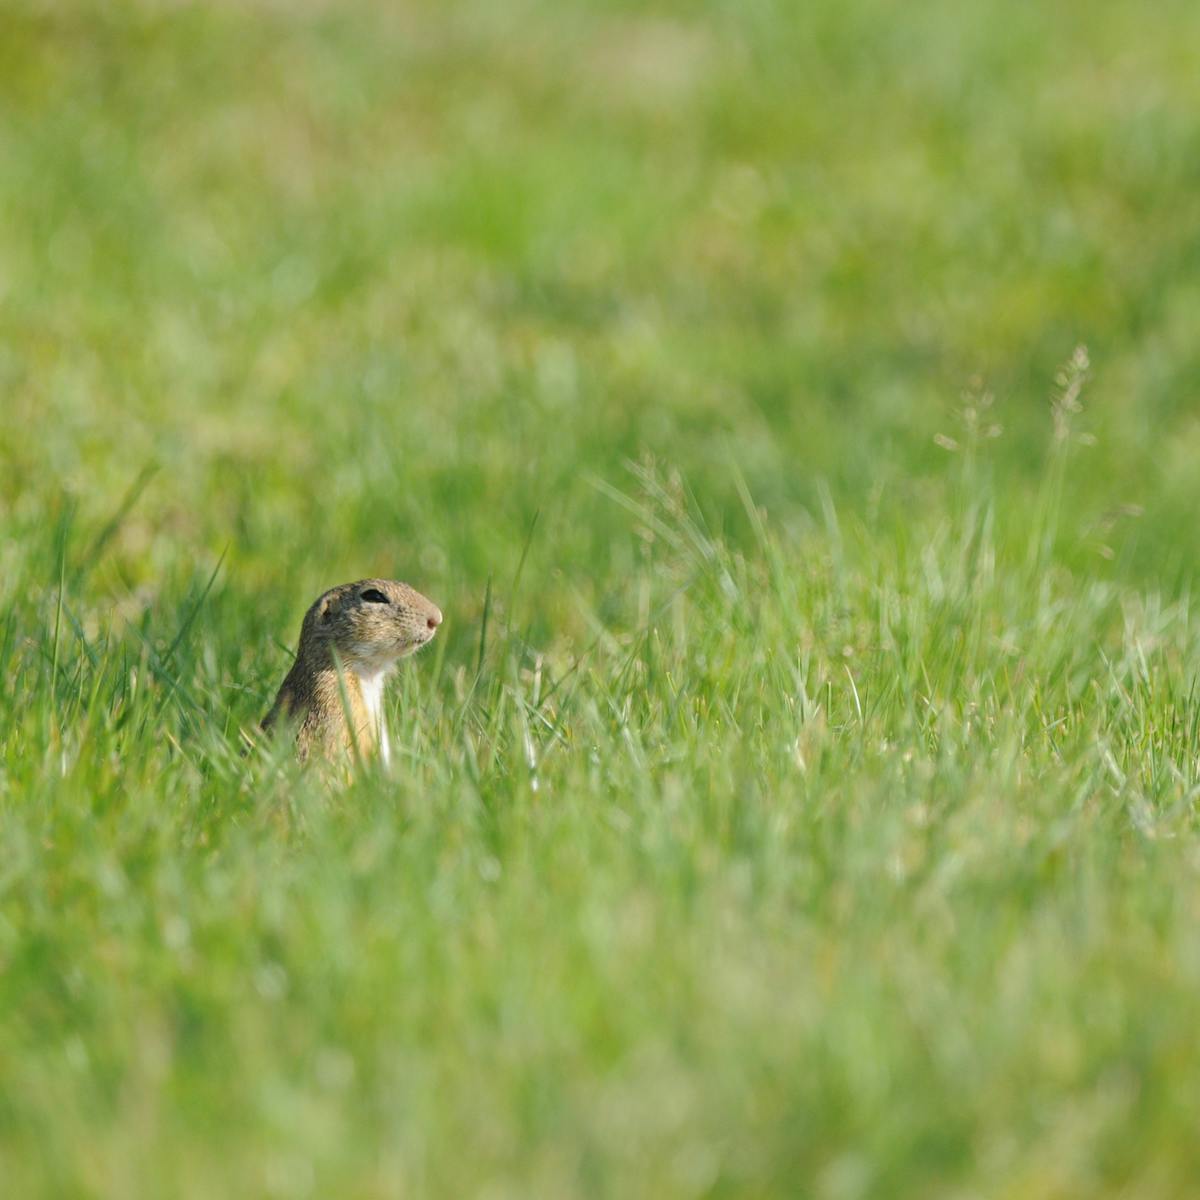 A ground squirrel pokes its head above a field of green grass